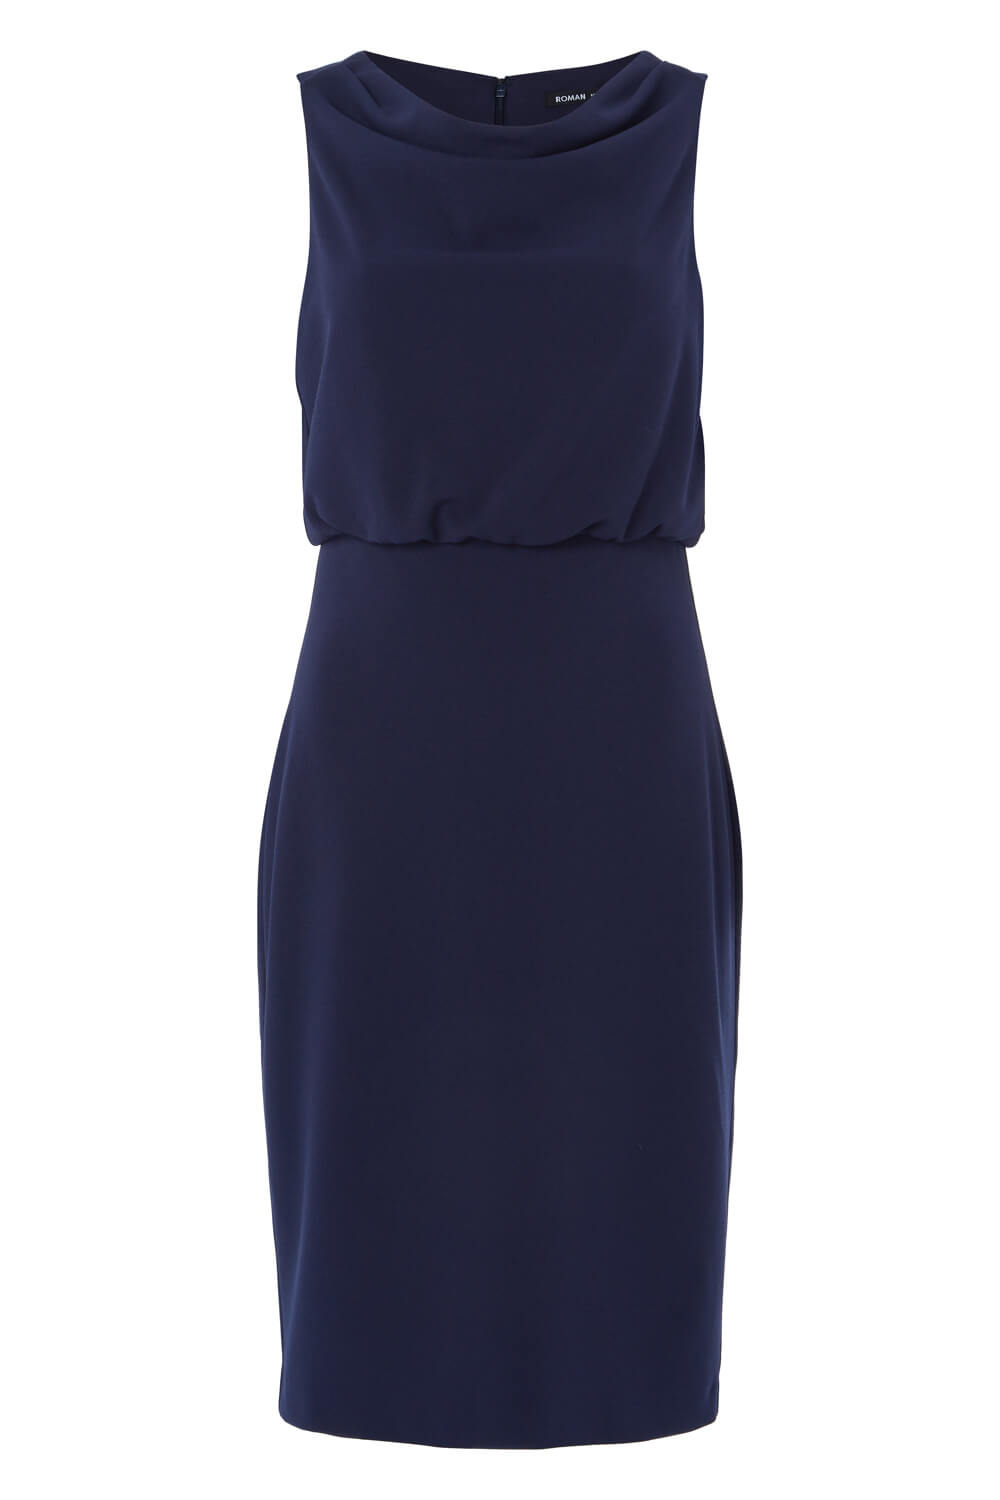 Navy  Cowl Neck Fitted Dress, Image 5 of 5